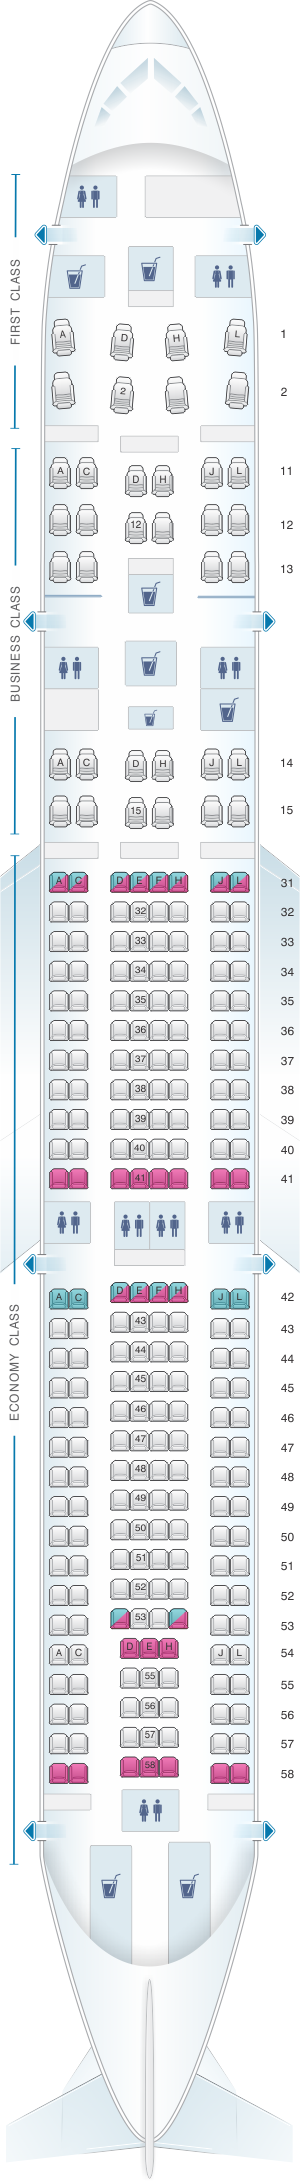 Seat map for Air China Airbus A340 300